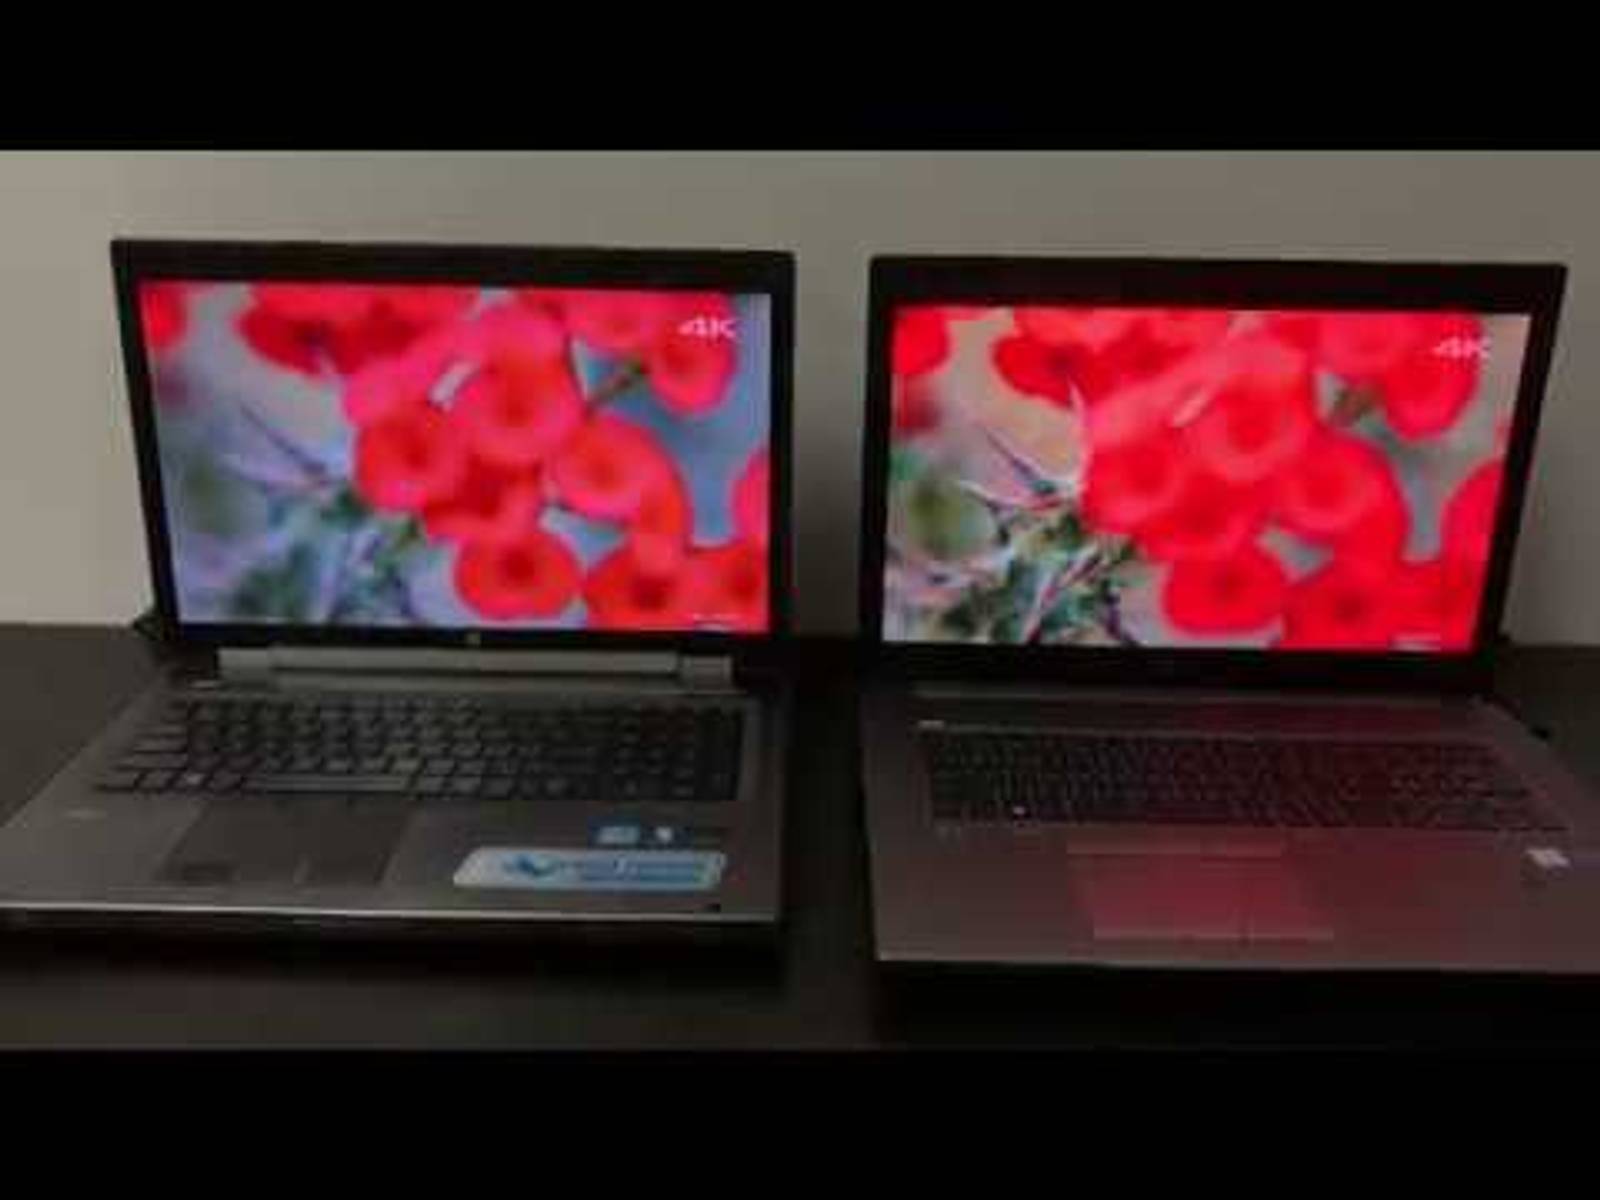 4k display and a laptop with a FHD display